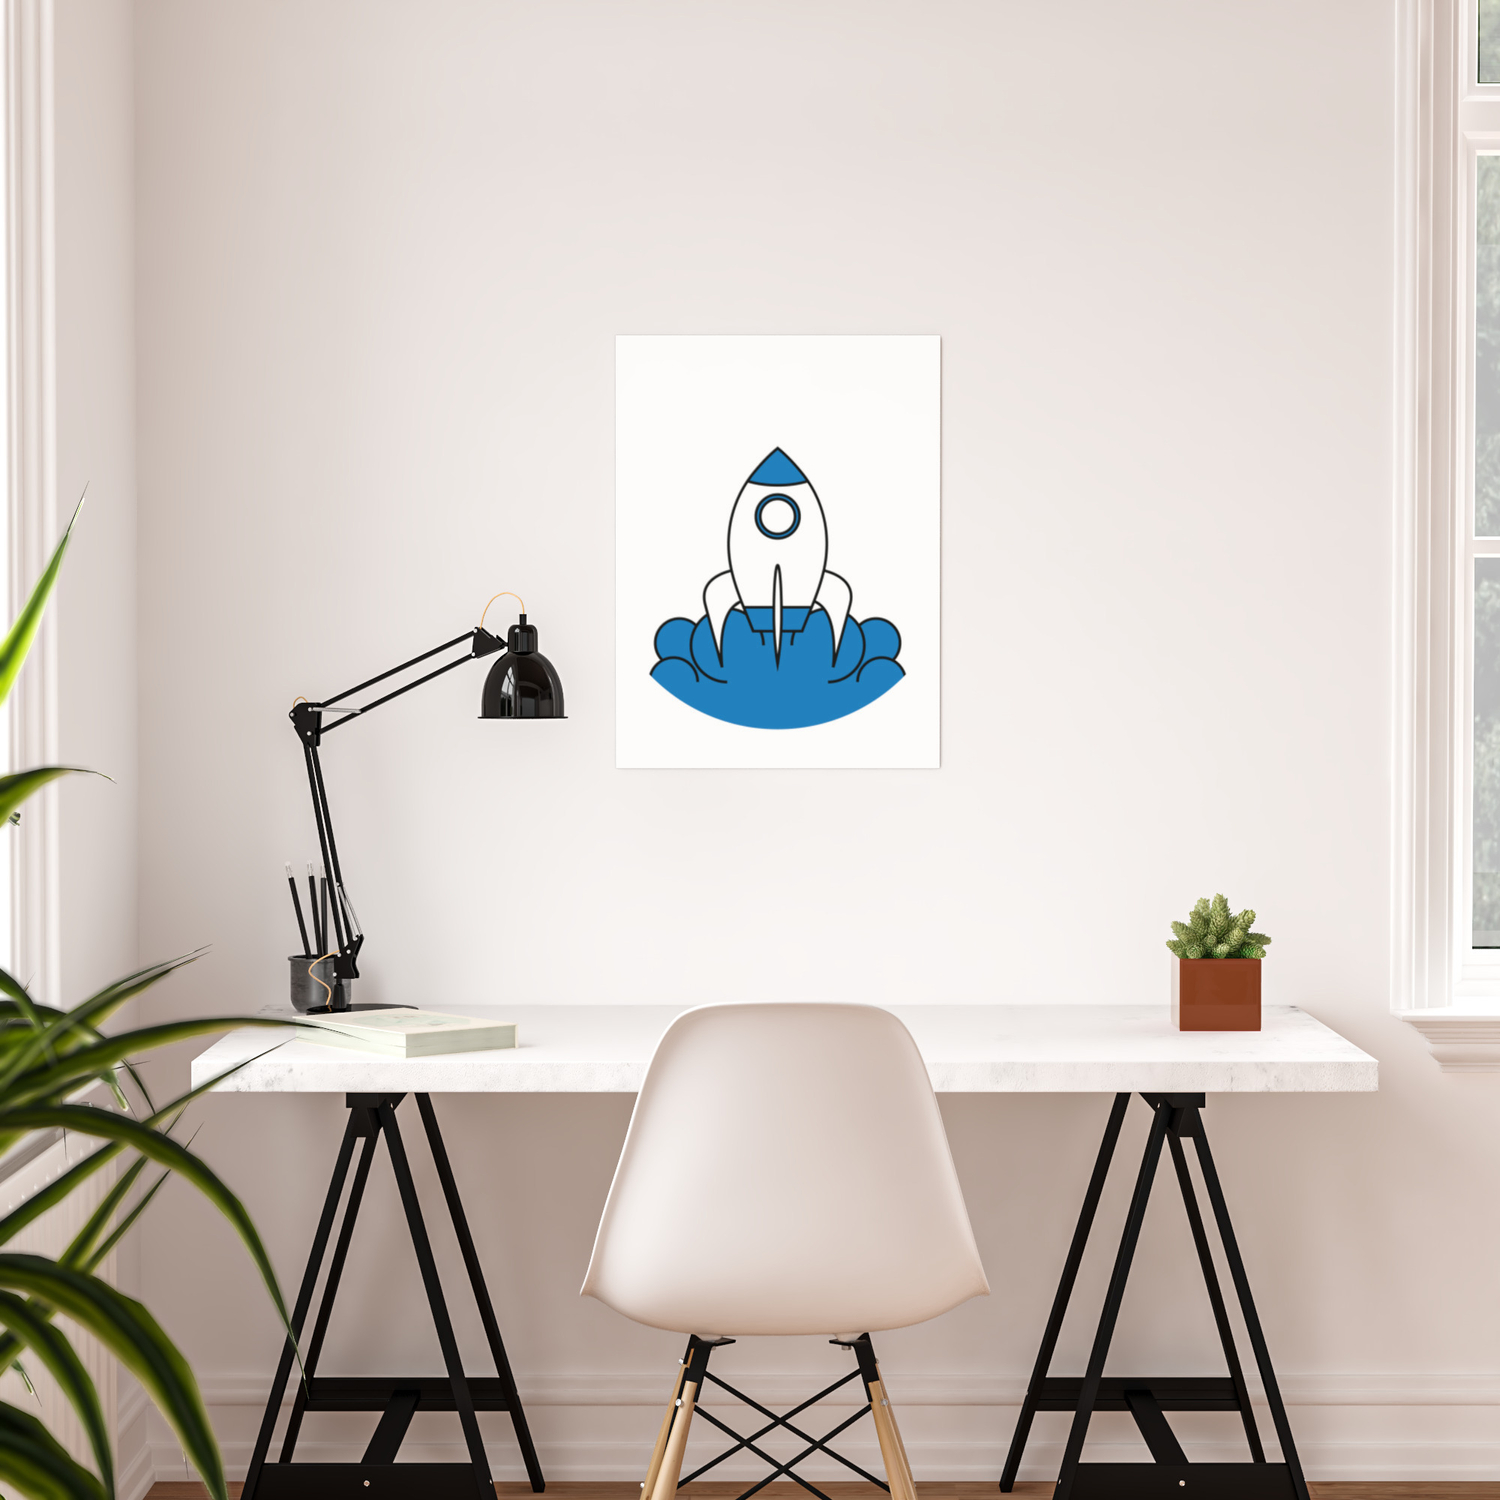 Blue And White Rocket Ship Inside A Thin White Circle A Cute Simple Illustration Of A Rocket Space Poster By Bela1992